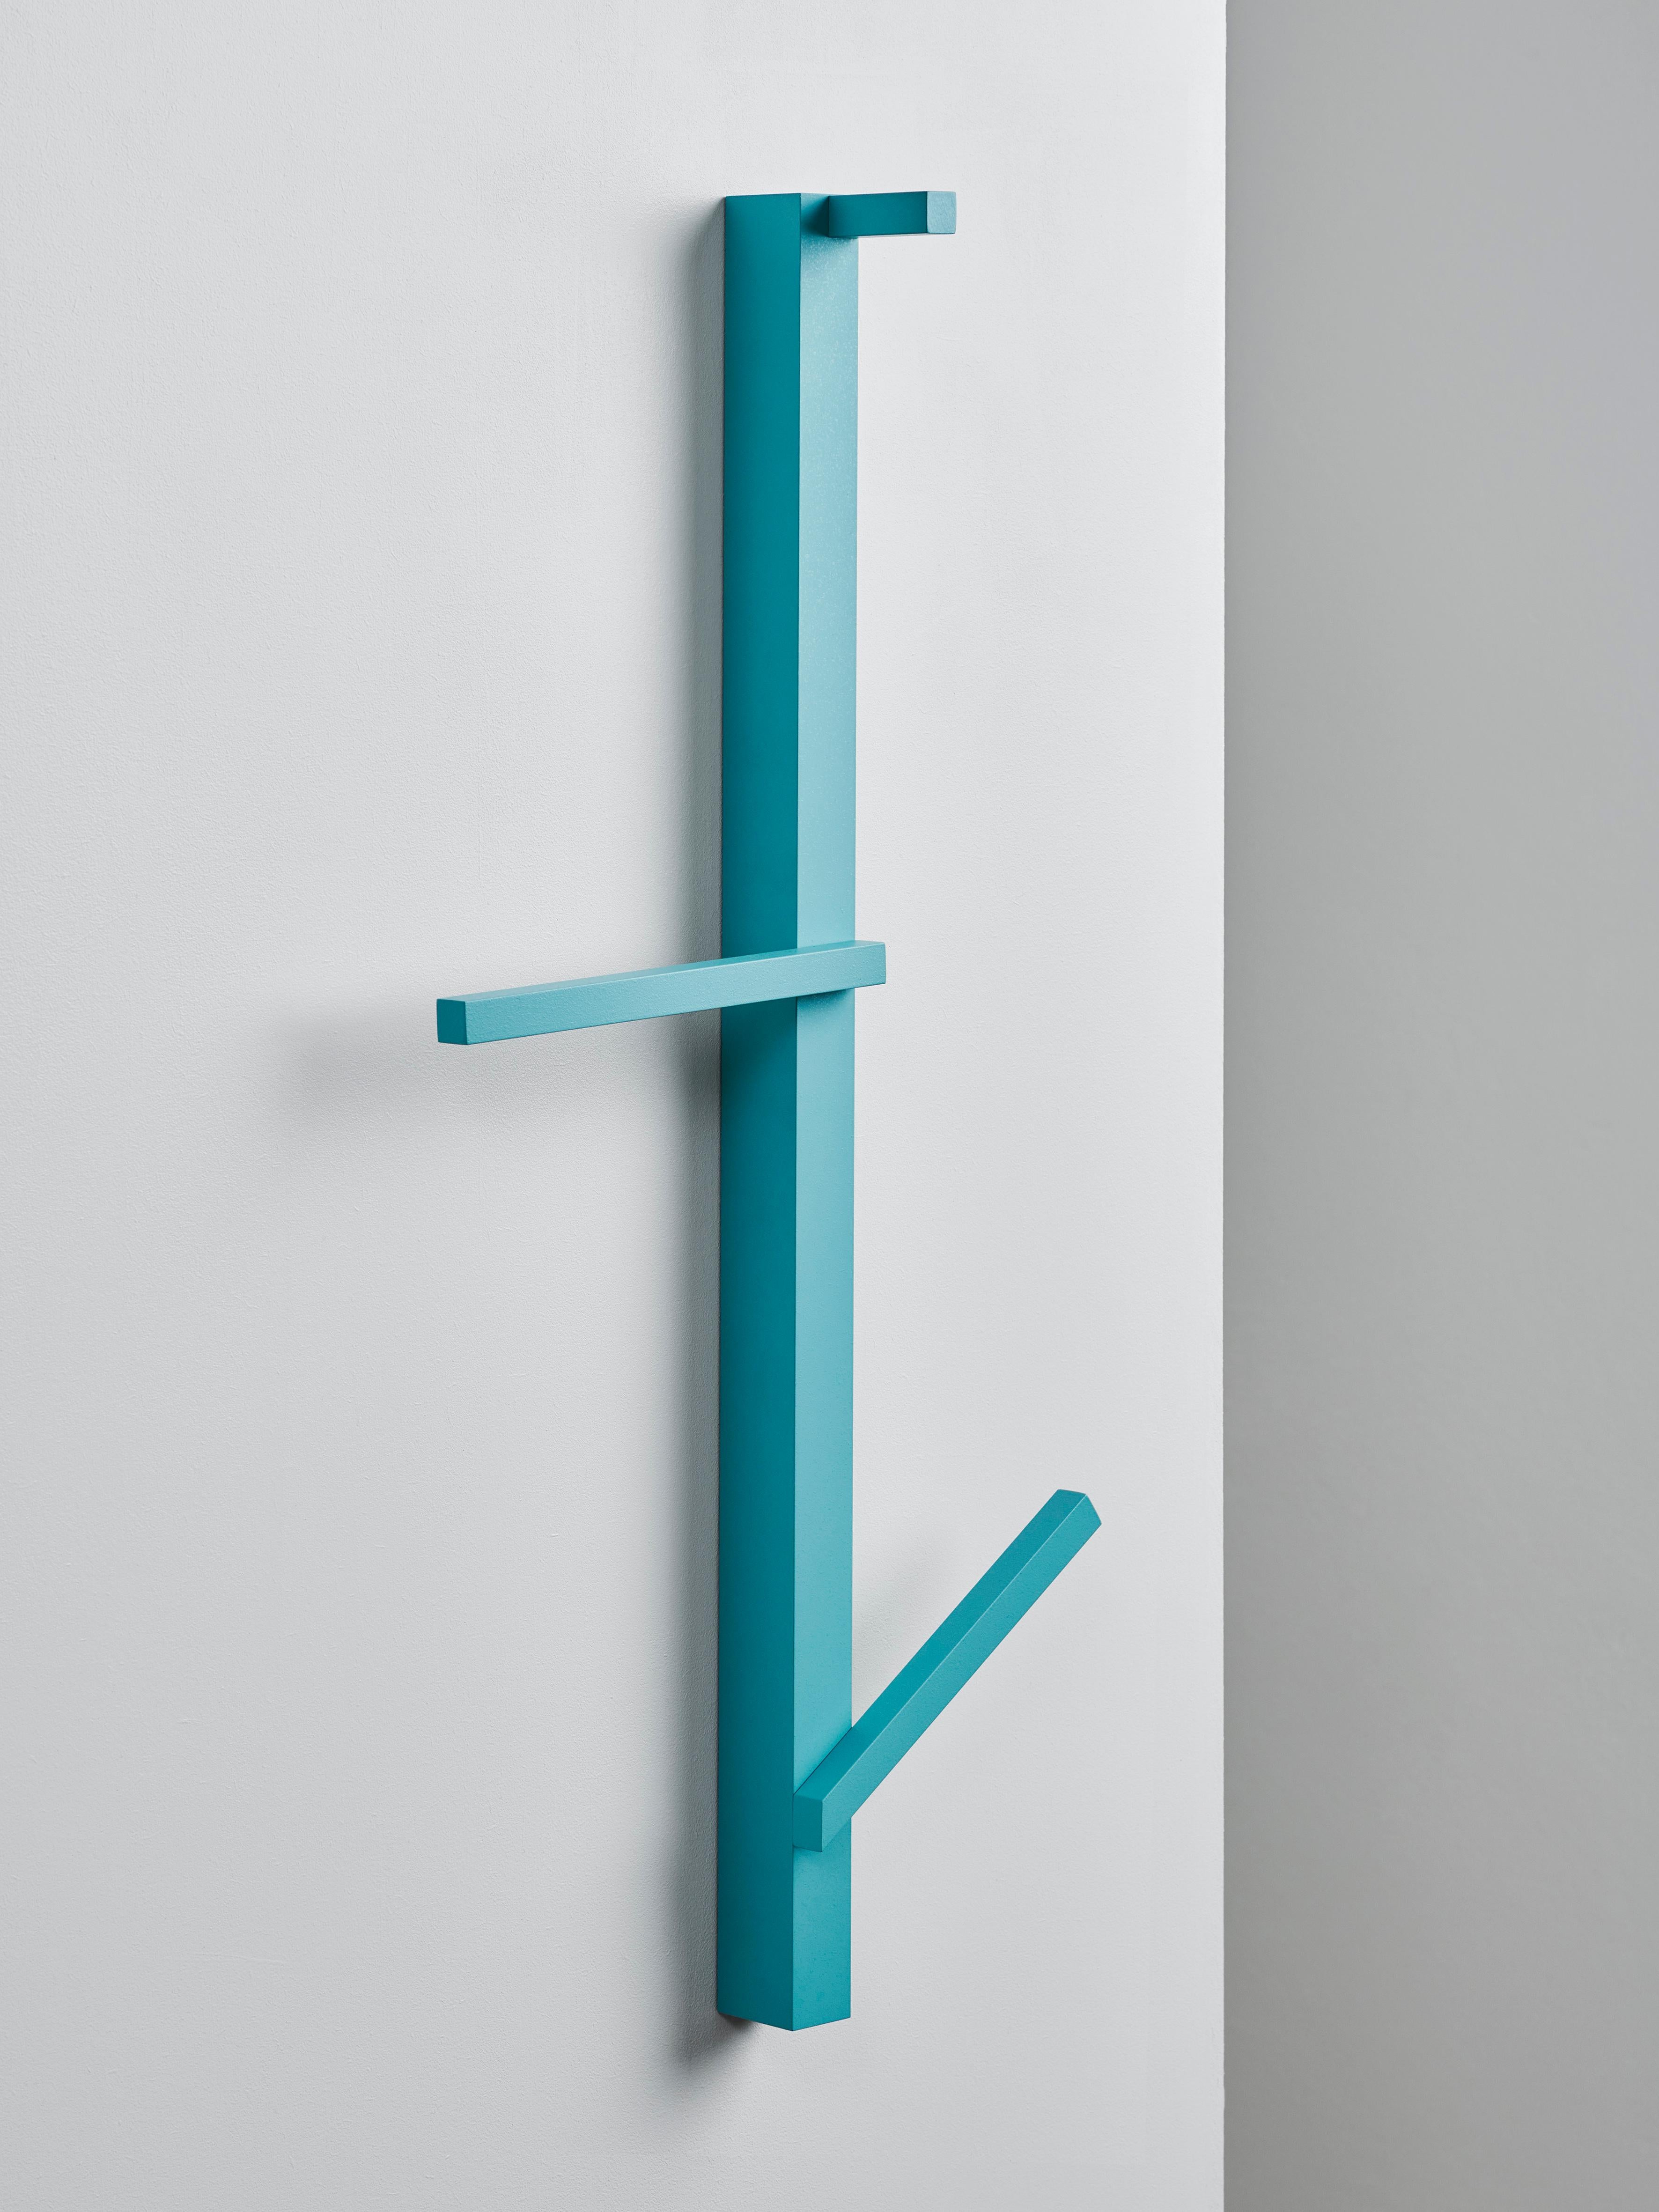 Valet serves as a hanger for clothes, towels or bags in the entryway of your home, the bath- or bedroom.
Three pieces of aluminium with differing inclinations are mounted on a vertical aluminium profile at three different heights to insure a